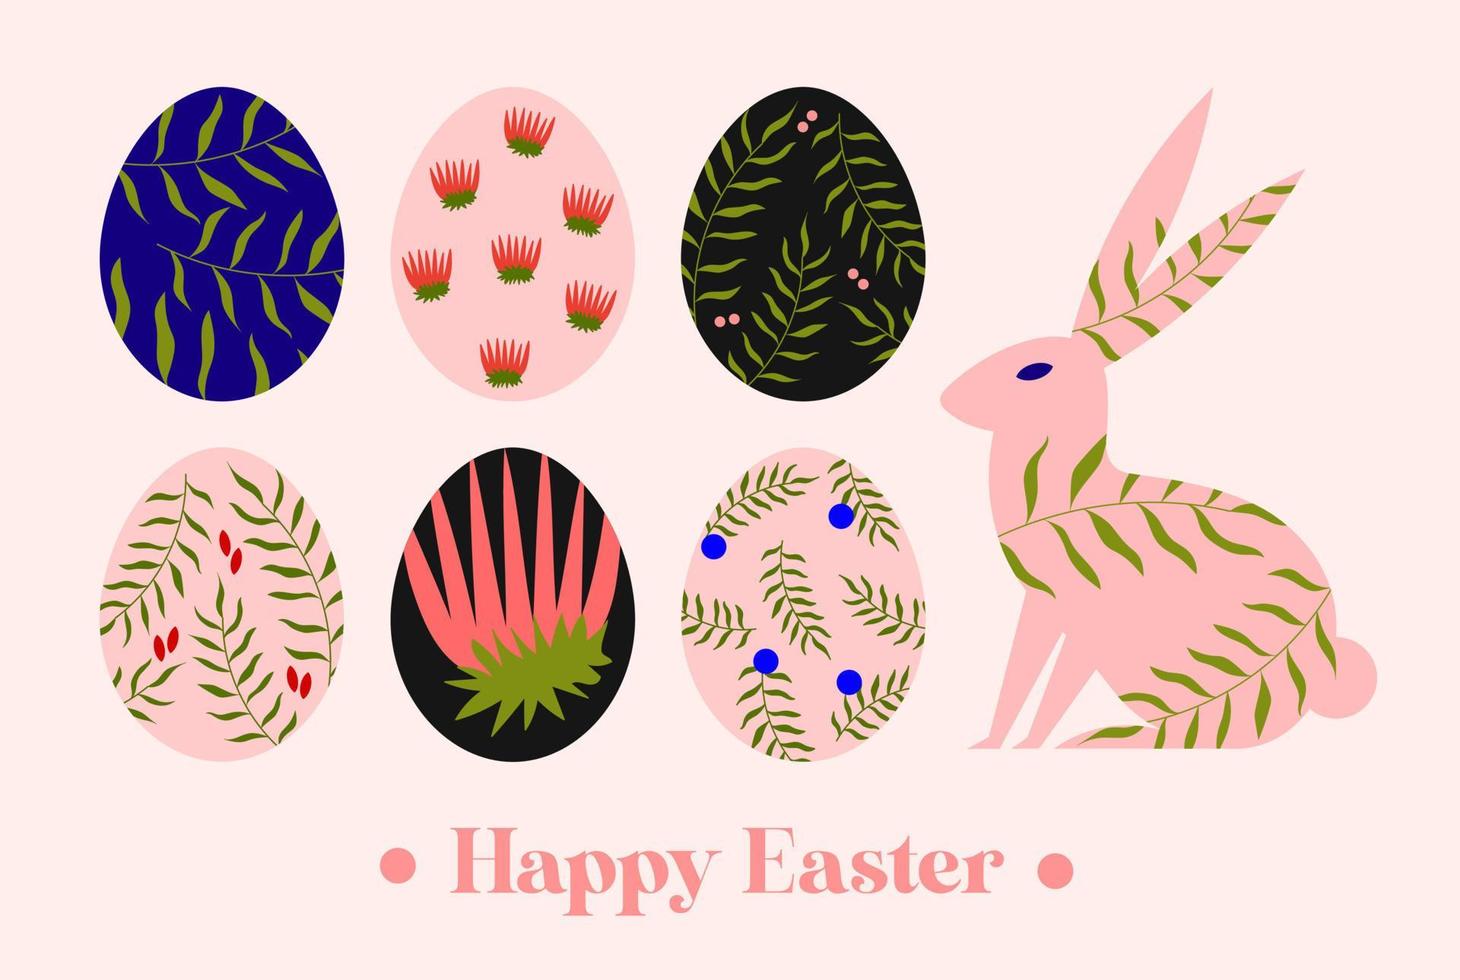 Easter eggs set with different textures, patterns and colors. Spring holiday. Vector illustration isolated on white background.